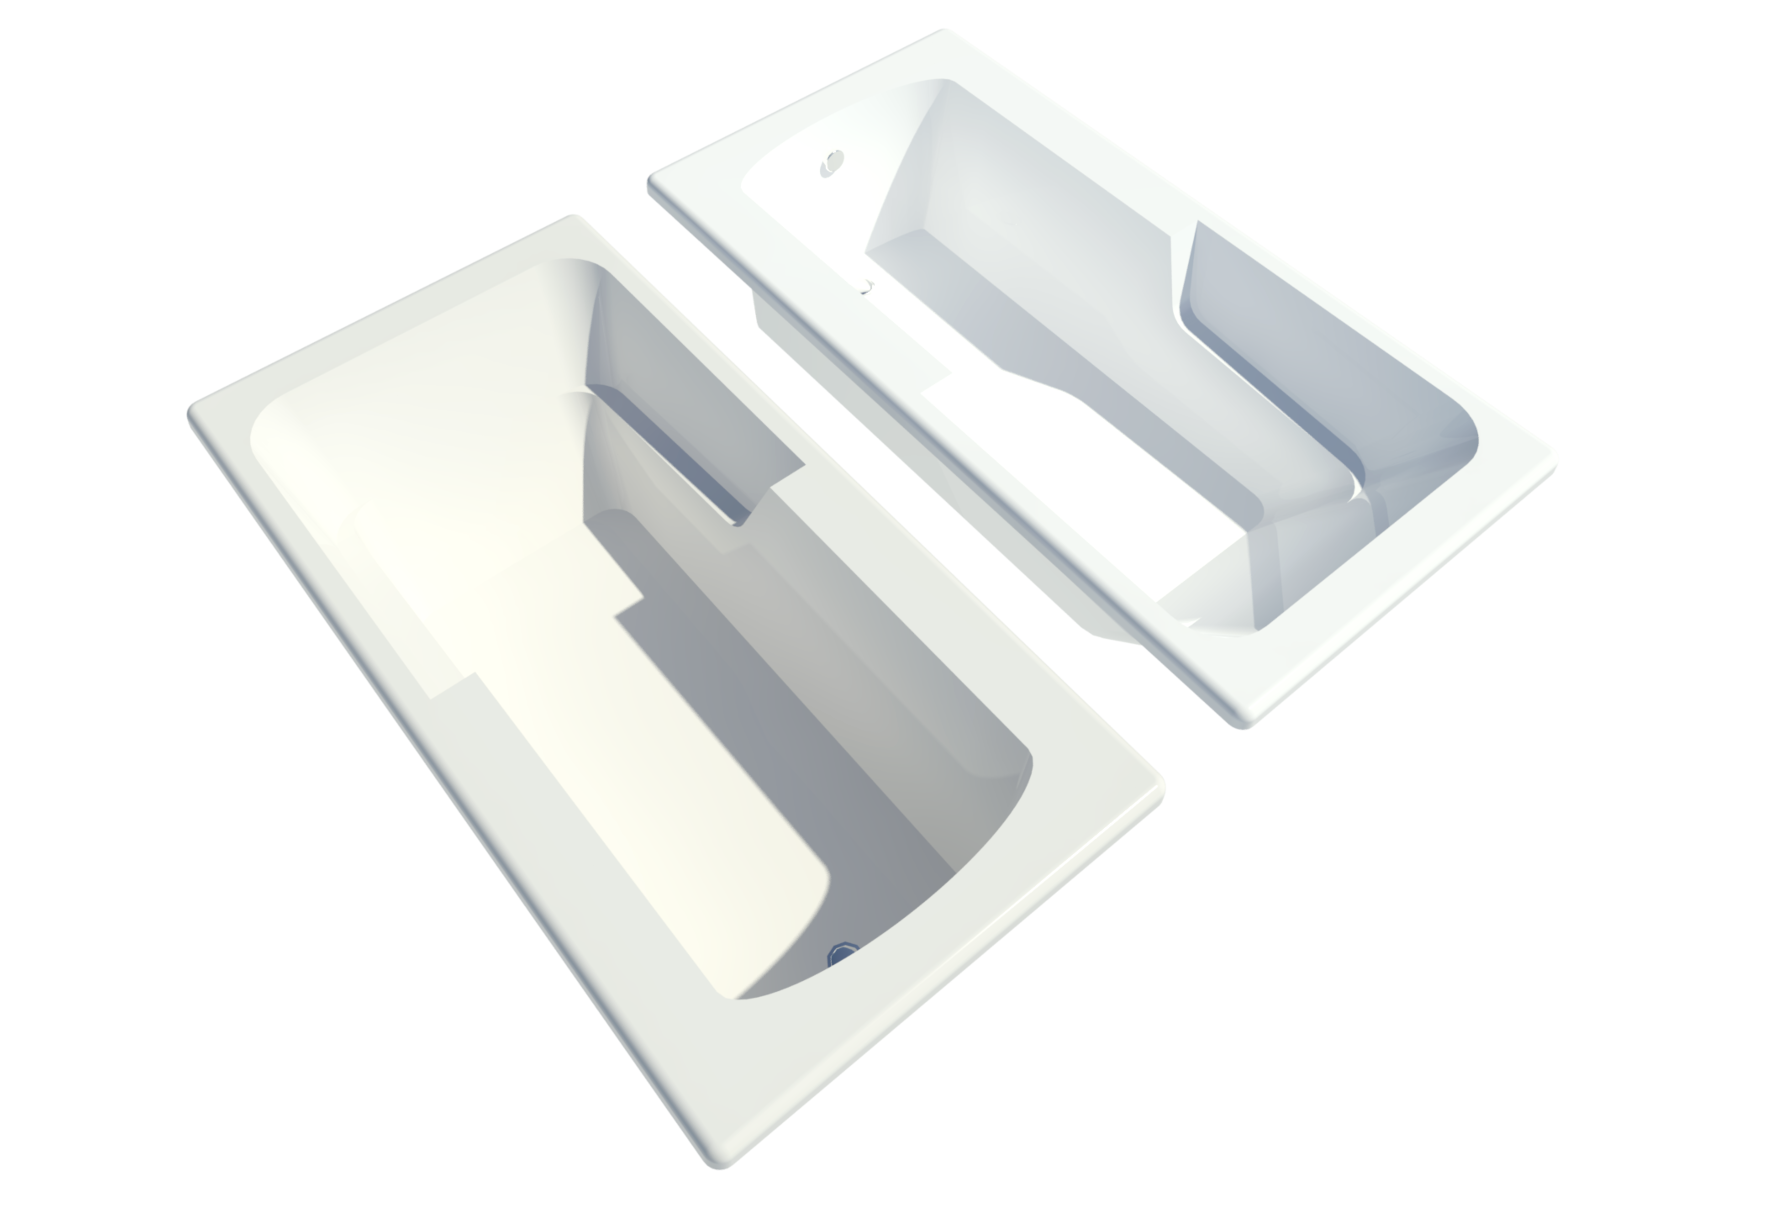 A Revit Raytrace render of two Americh’s Americh’s Madison 6030 ADA drop-in bathtubs in almond and white finishes.